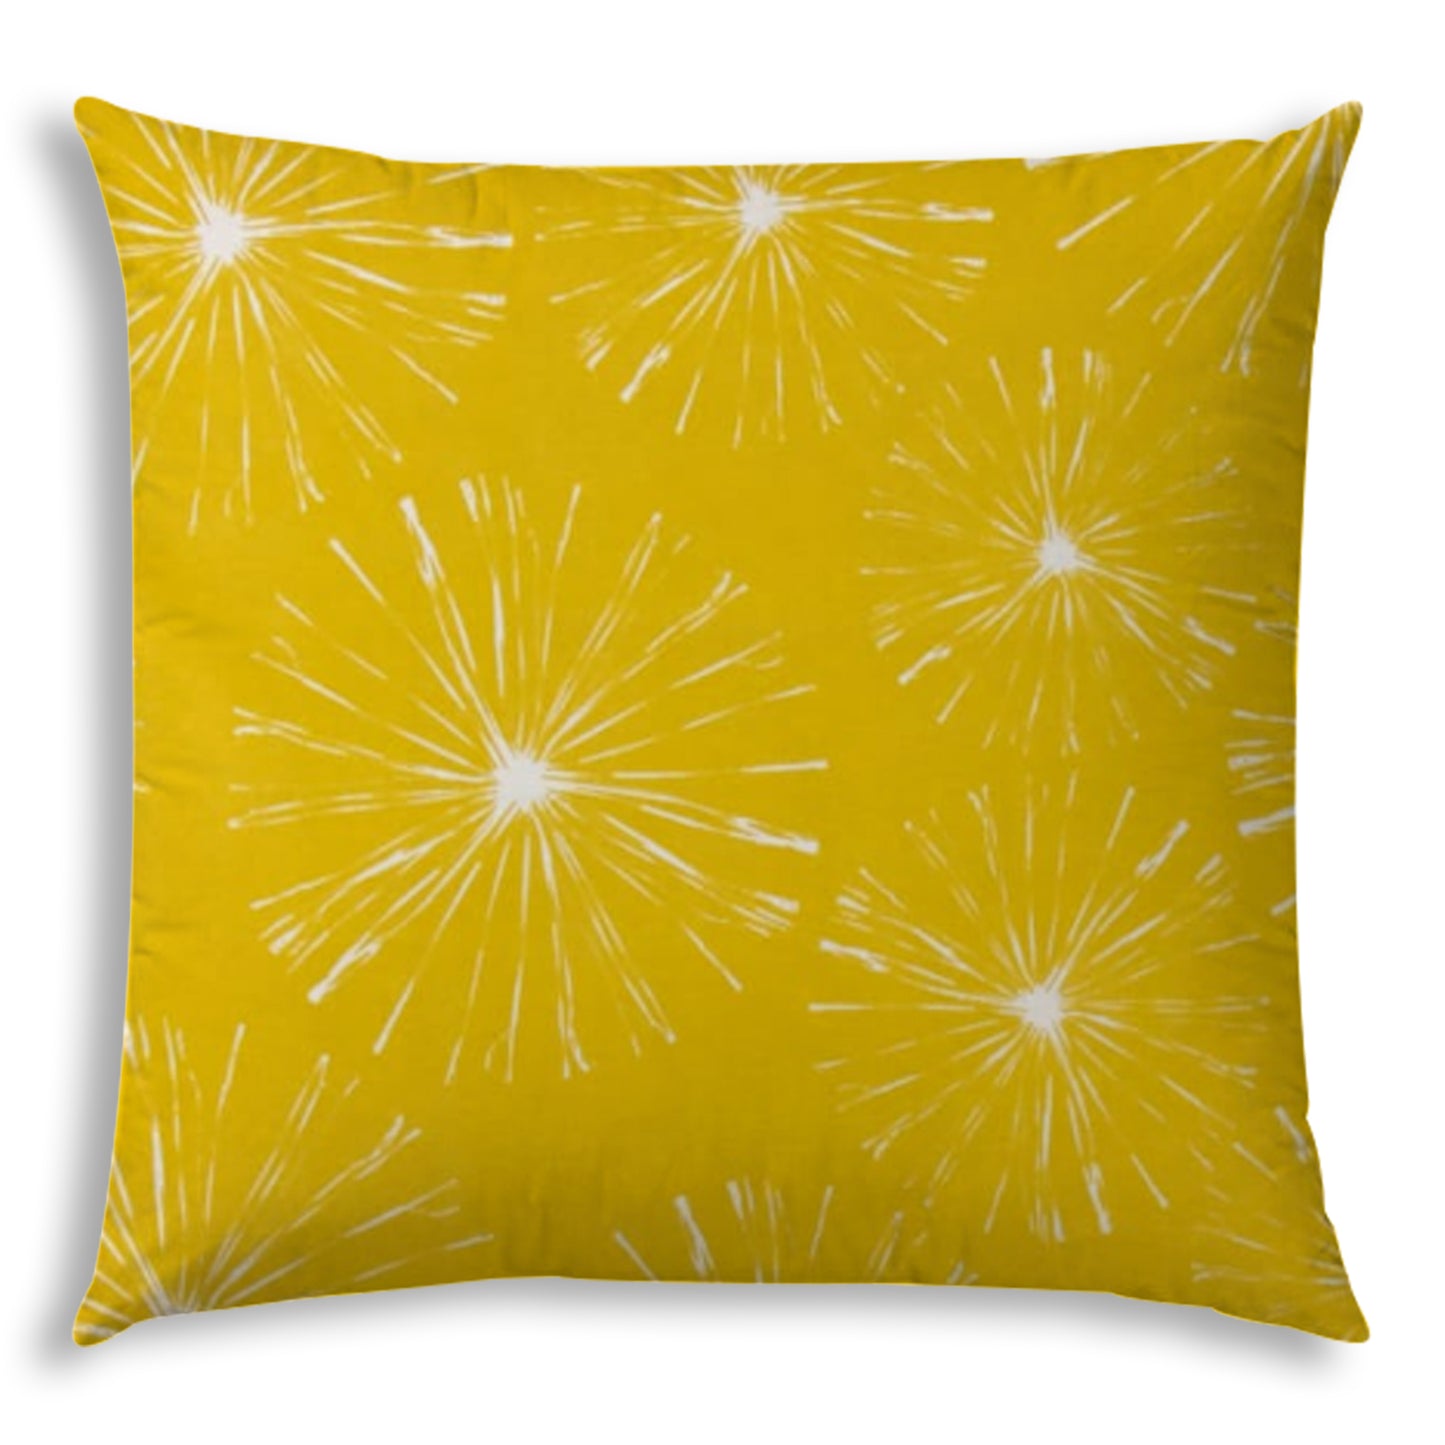 FIREWORKS Pineapple Indoor/Outdoor Pillow - Sewn Closure